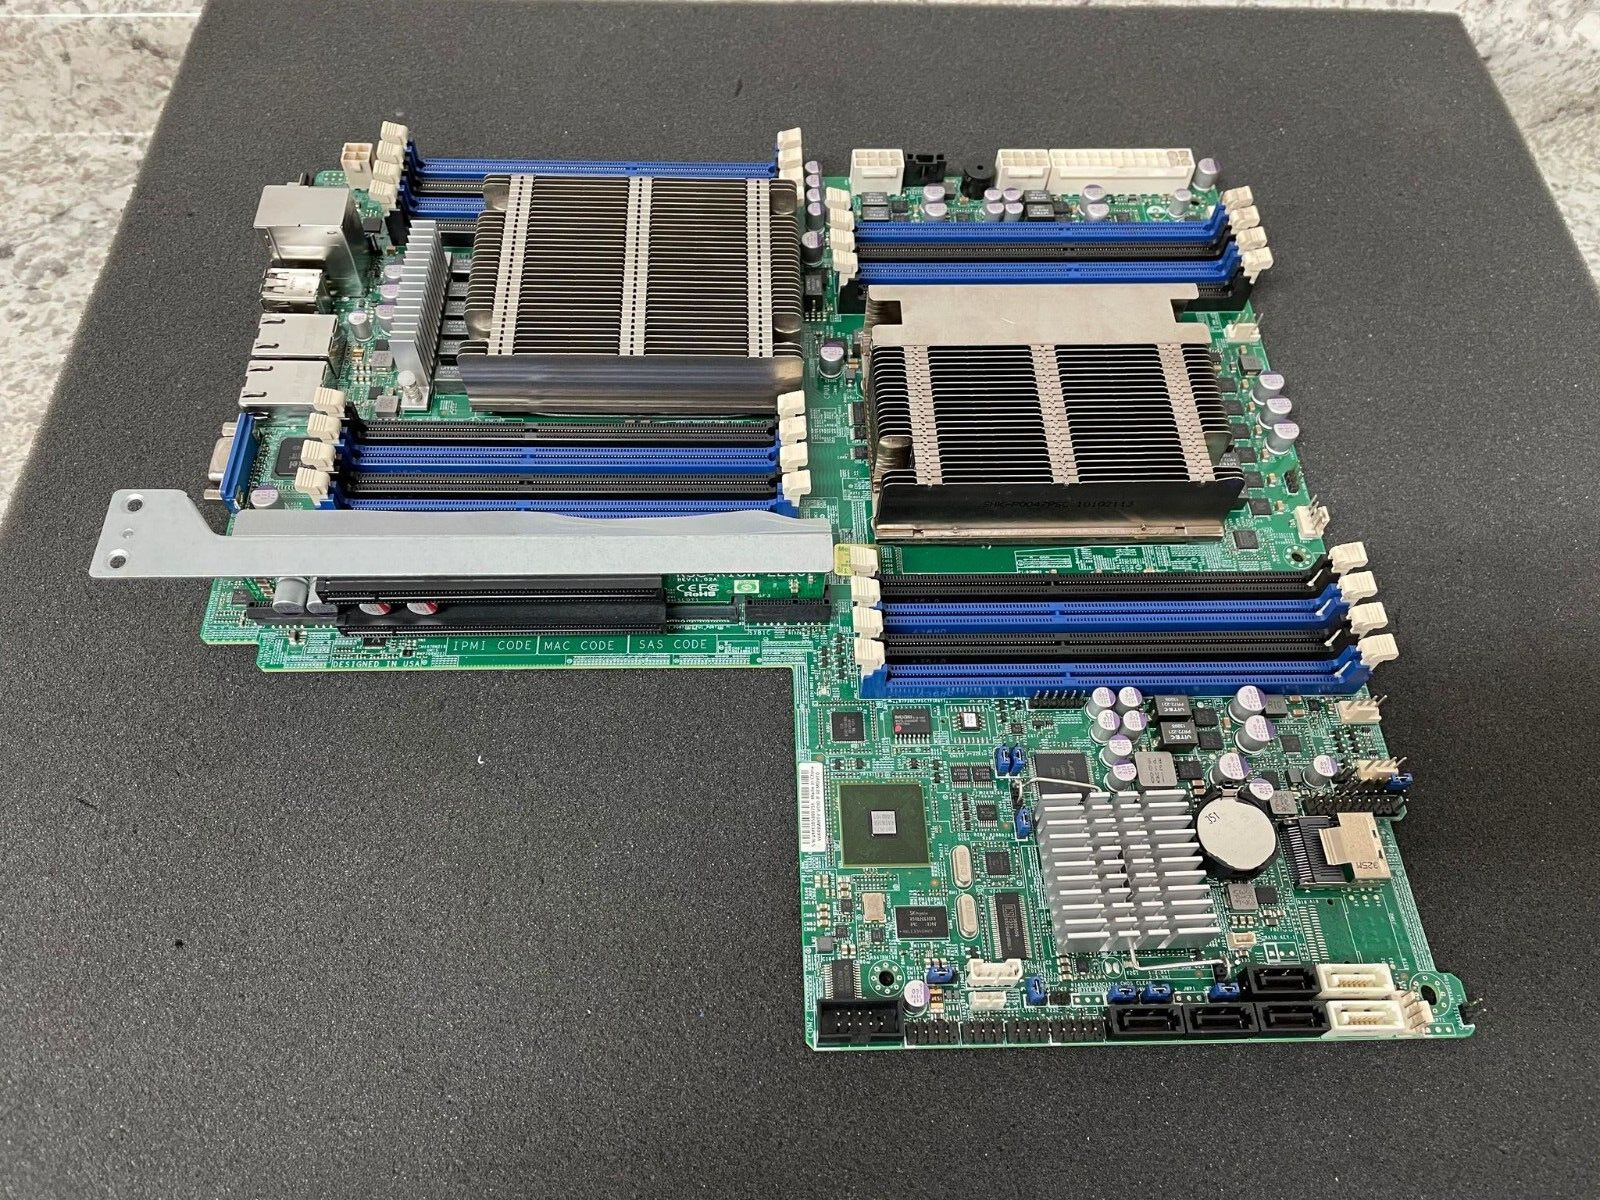 SuperMicro X9DRW-IF Server Motherboard - Intel Xeon E5-2640v2 (x2) - Tested